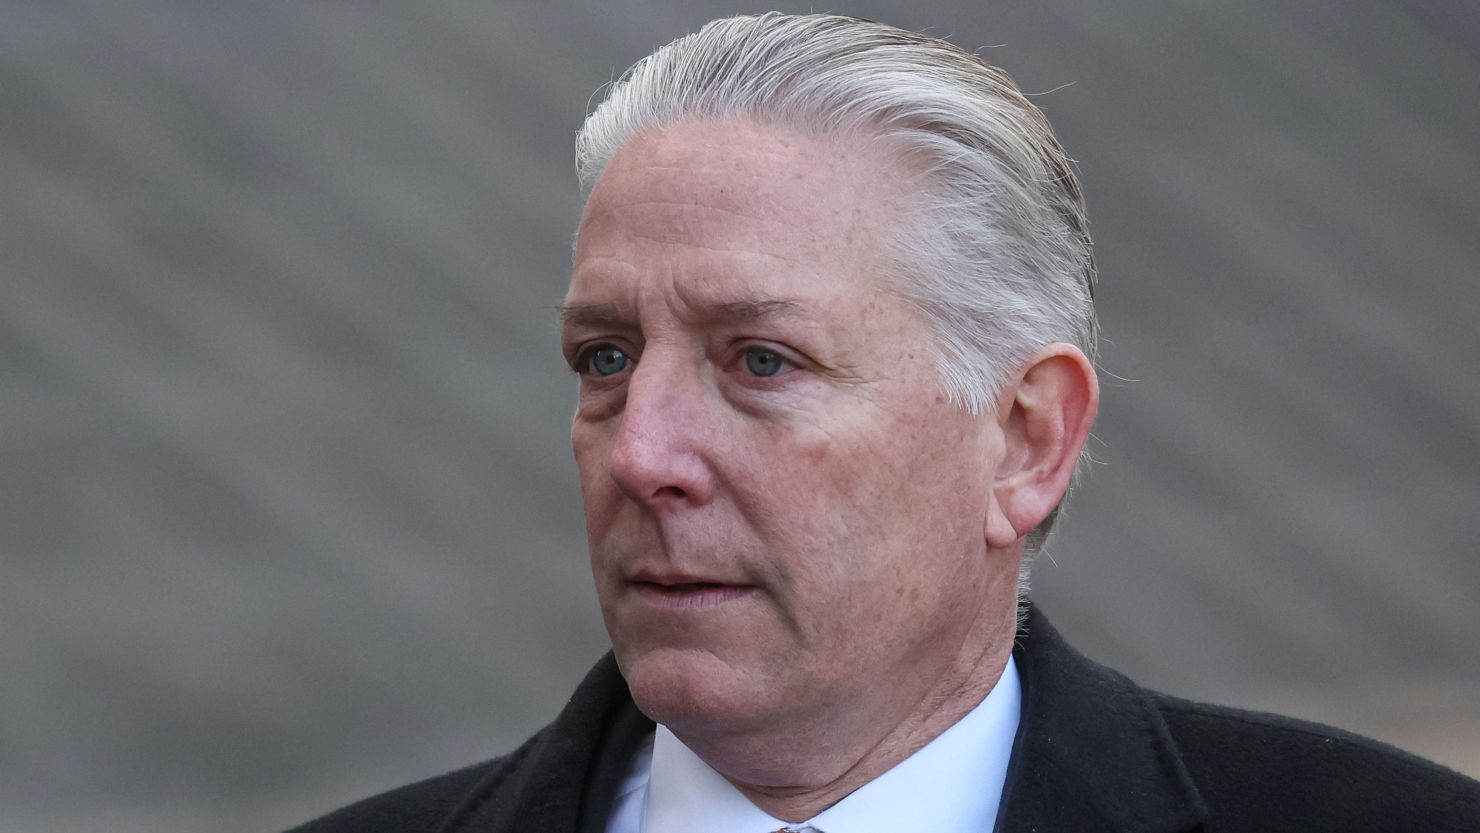 Charles McGonigal, a former FBI official, arrives at court in New York City on March 8, 2023.